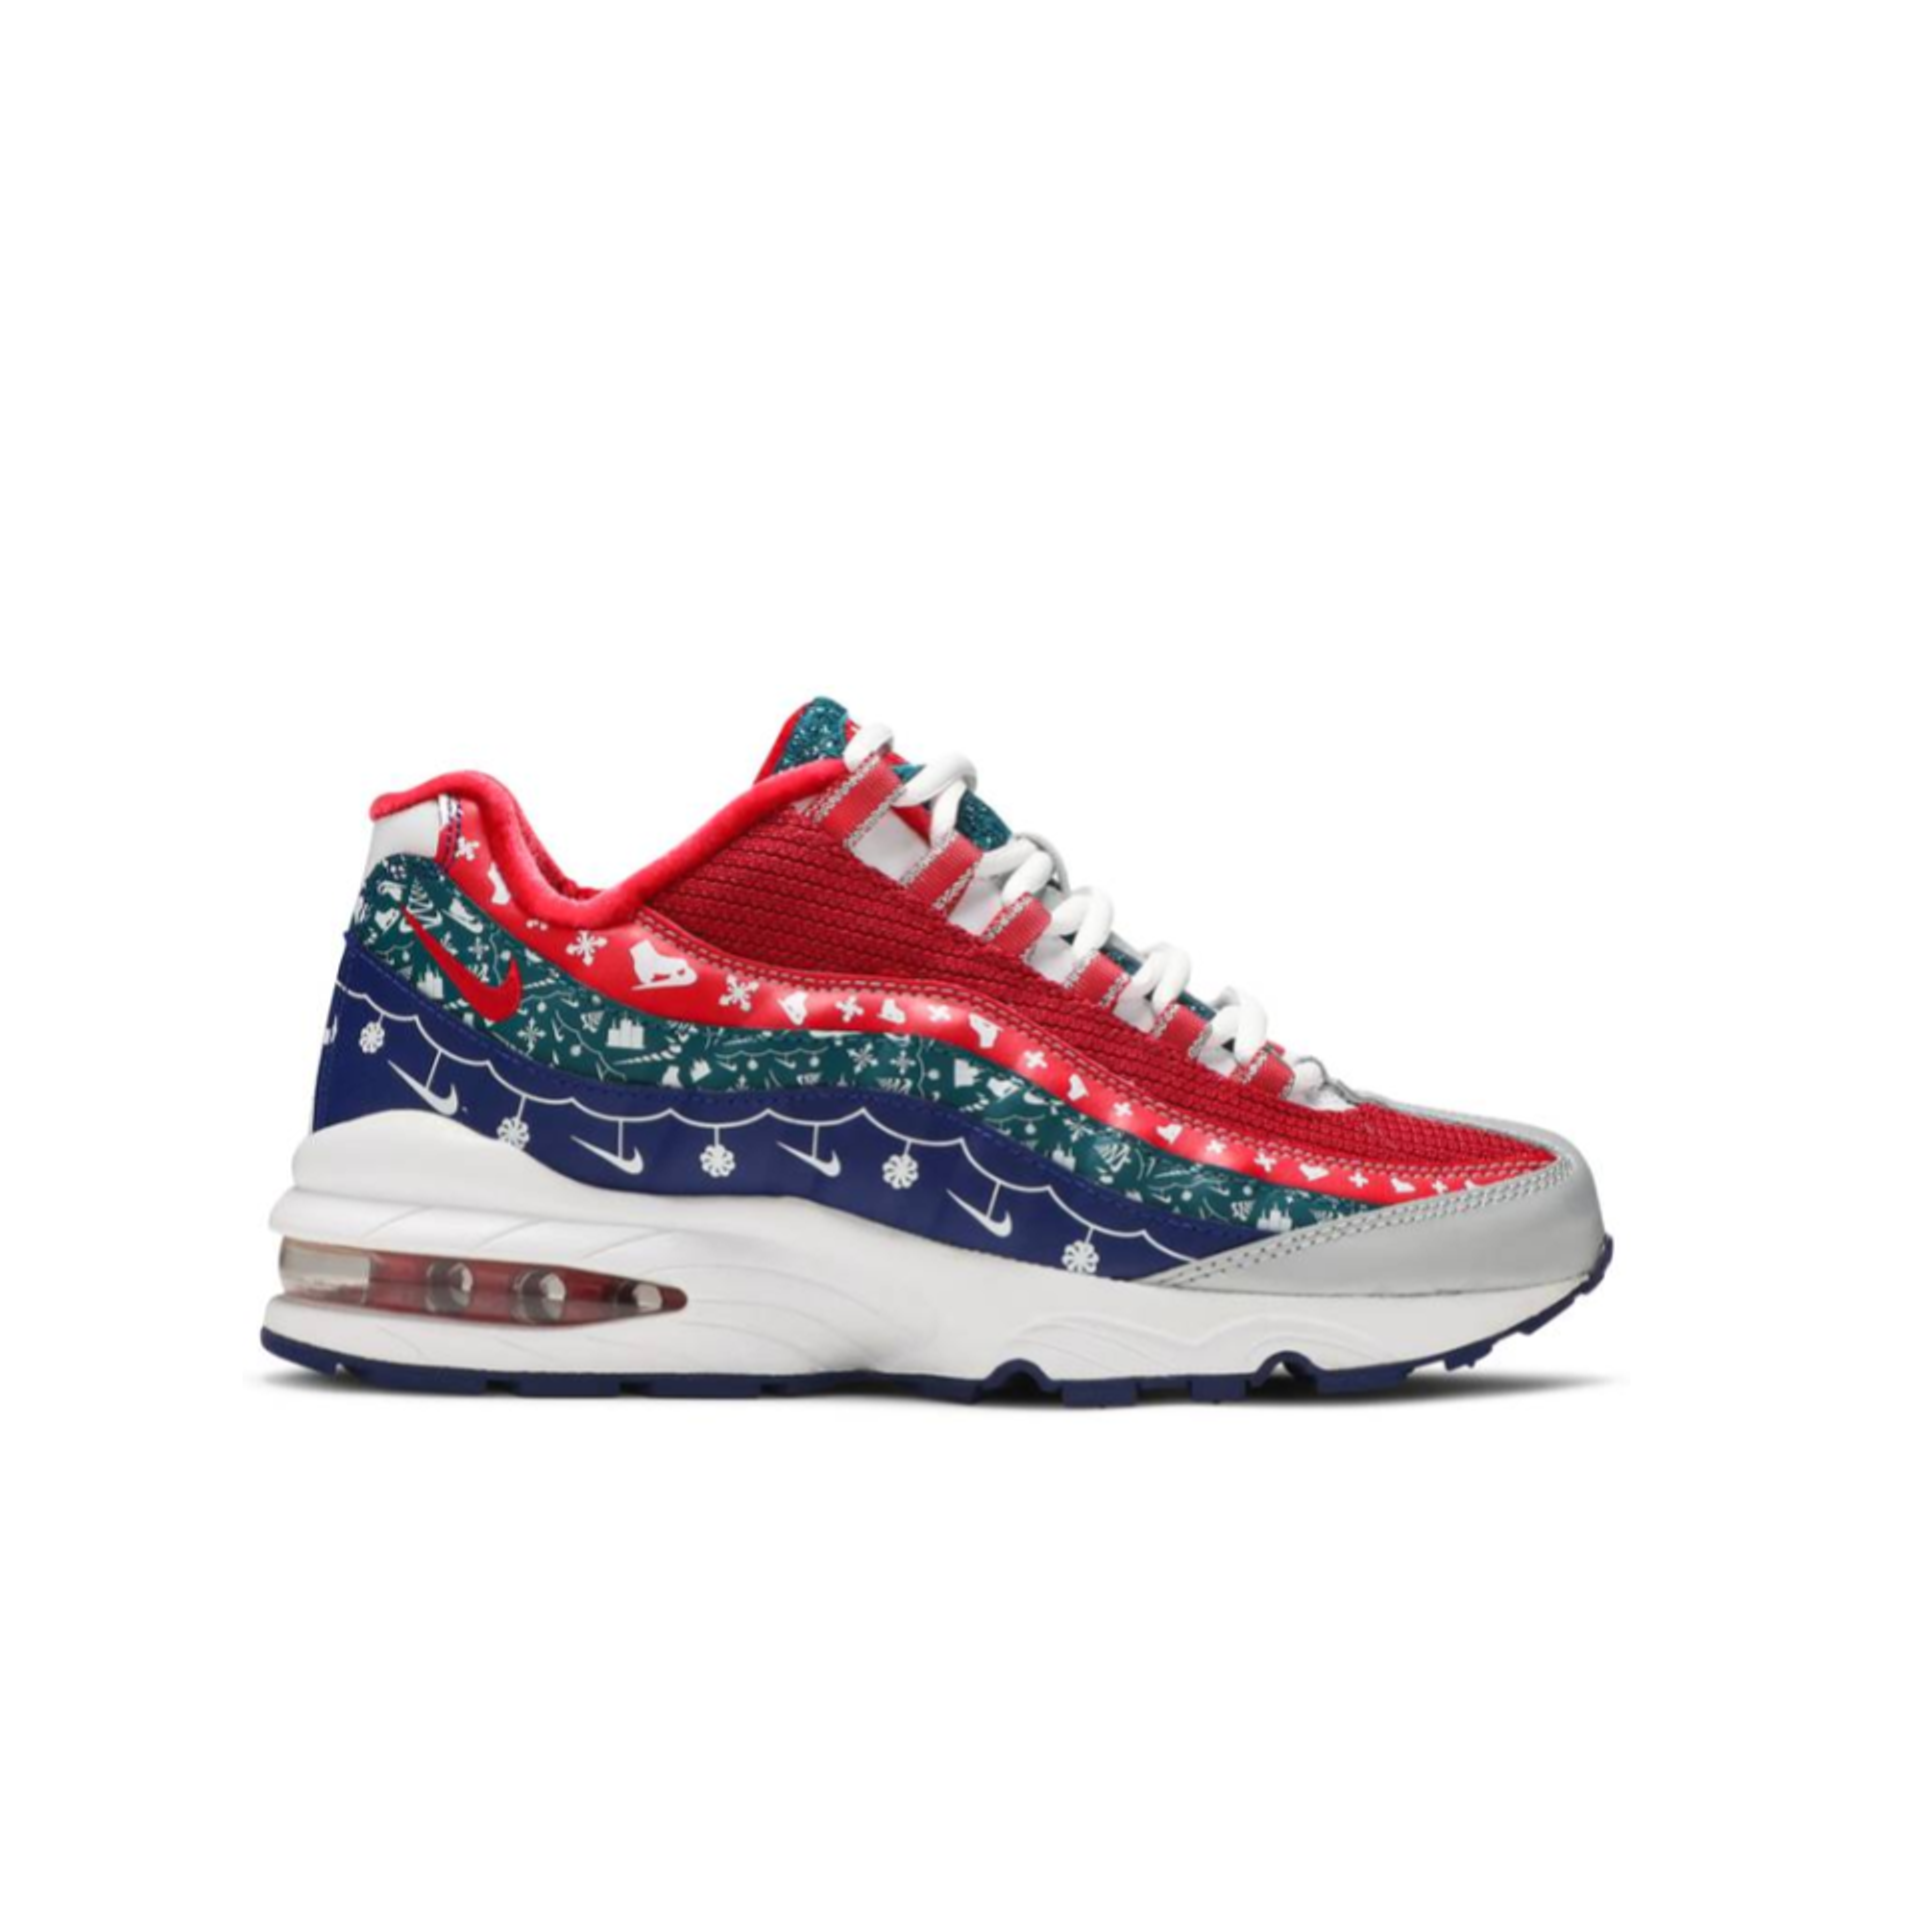 Nike Air Max 95 GS 'Ugly Christmas Sweater'